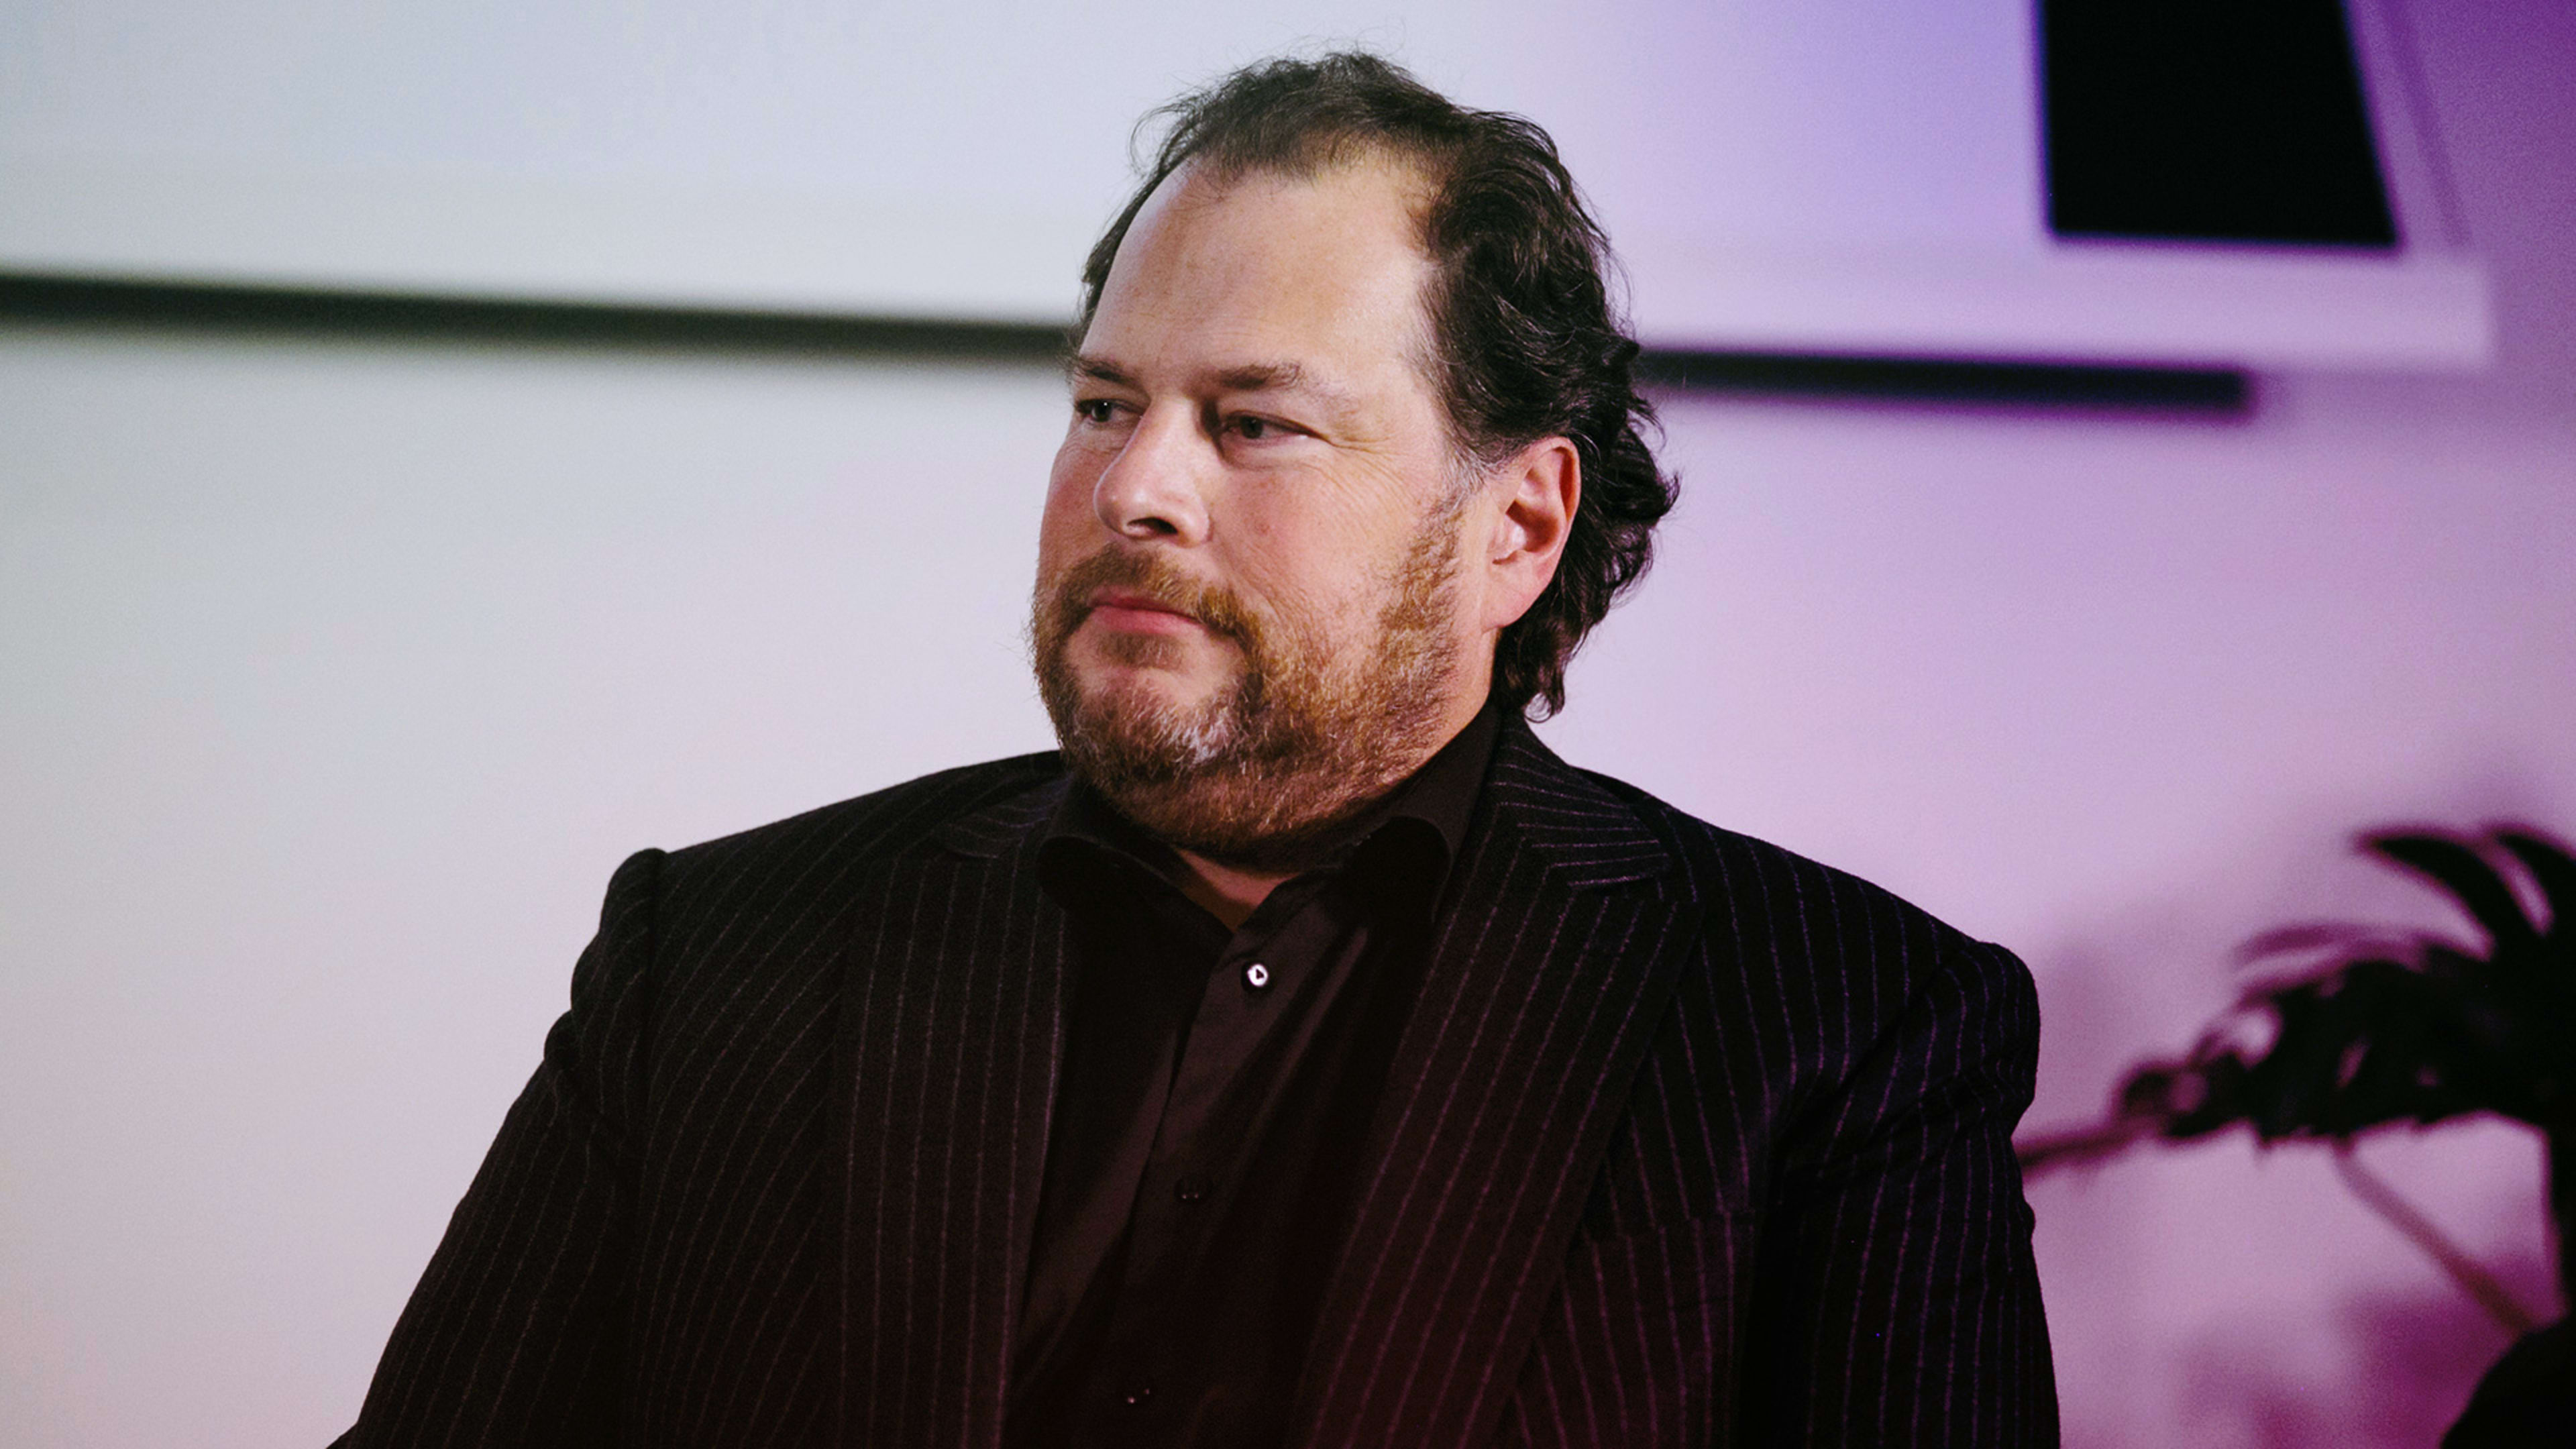 Salesforce’s Marc Benioff On The Power Of Values